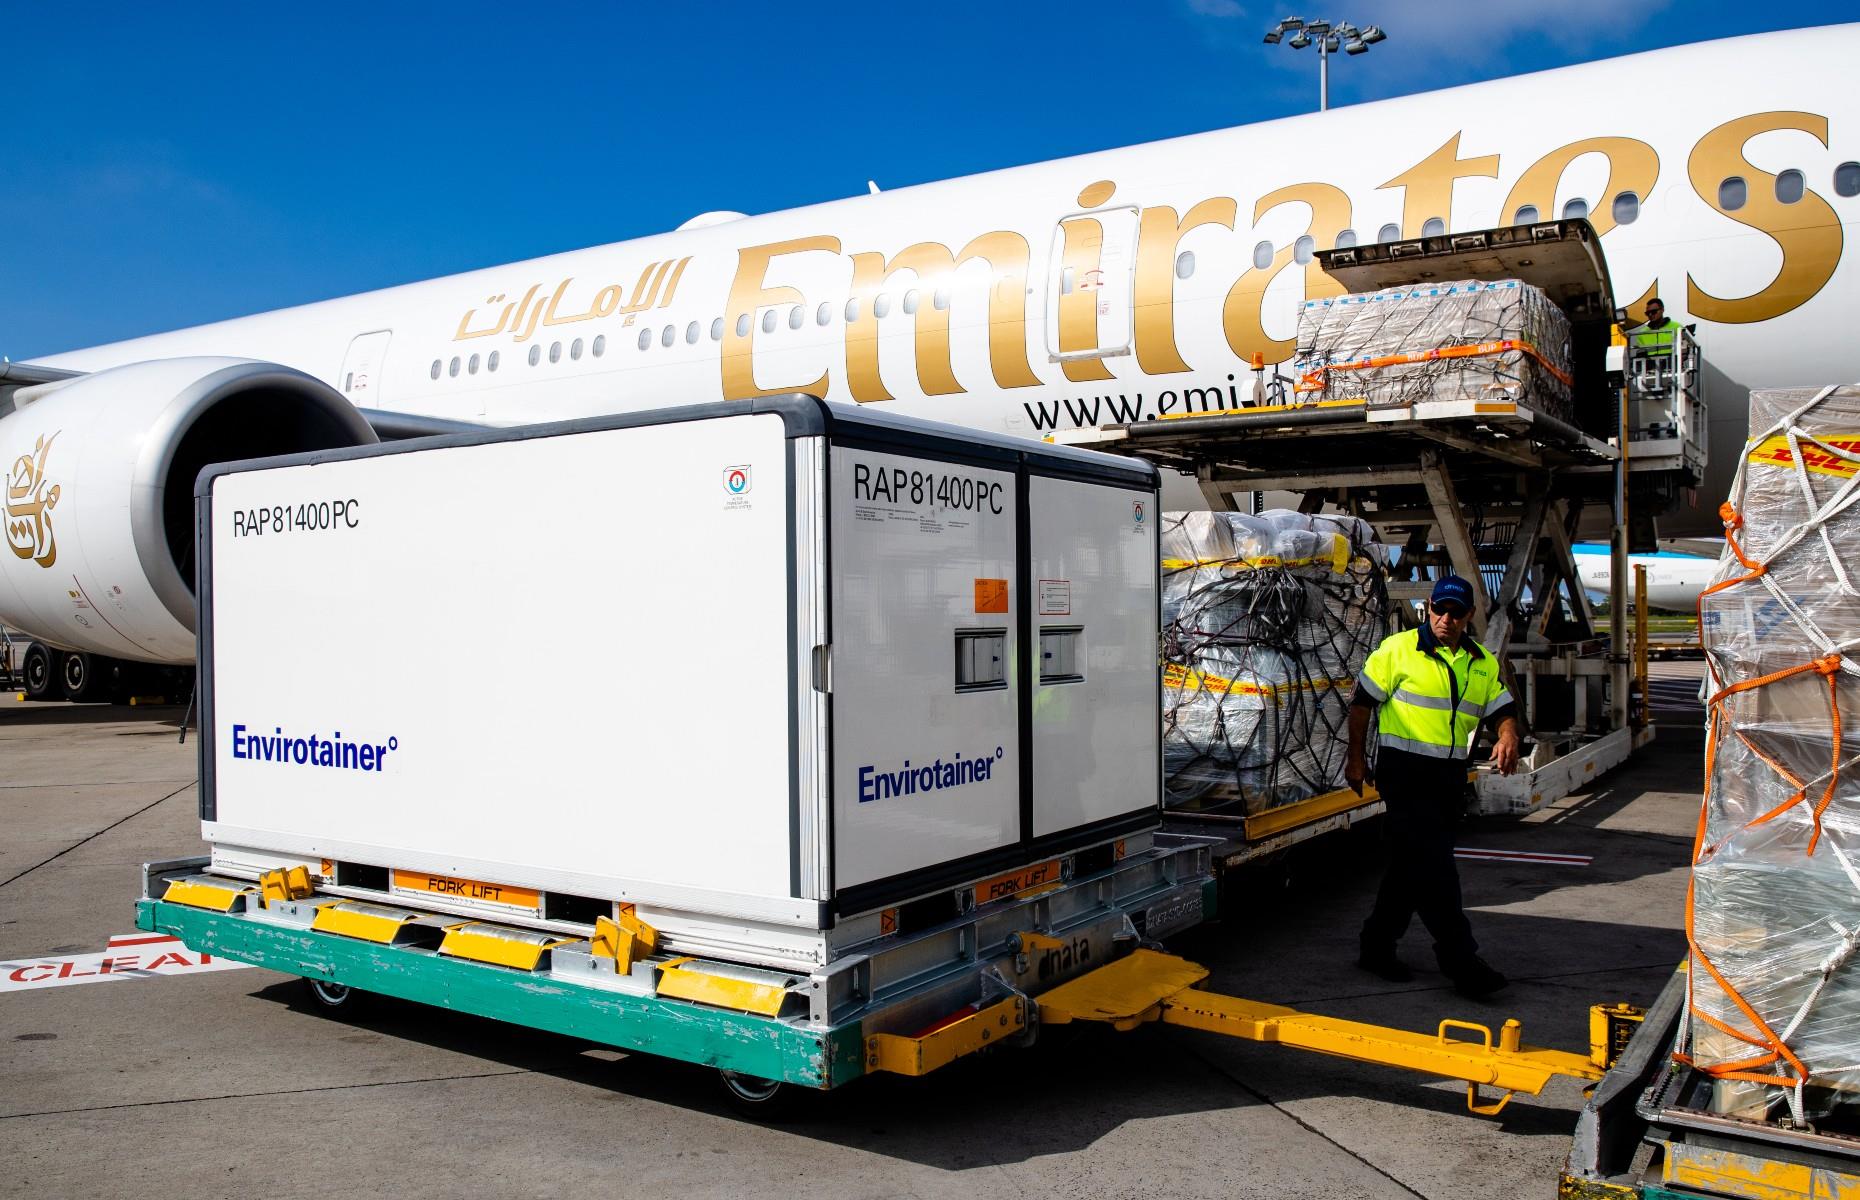 Airlines have turned into cargo services